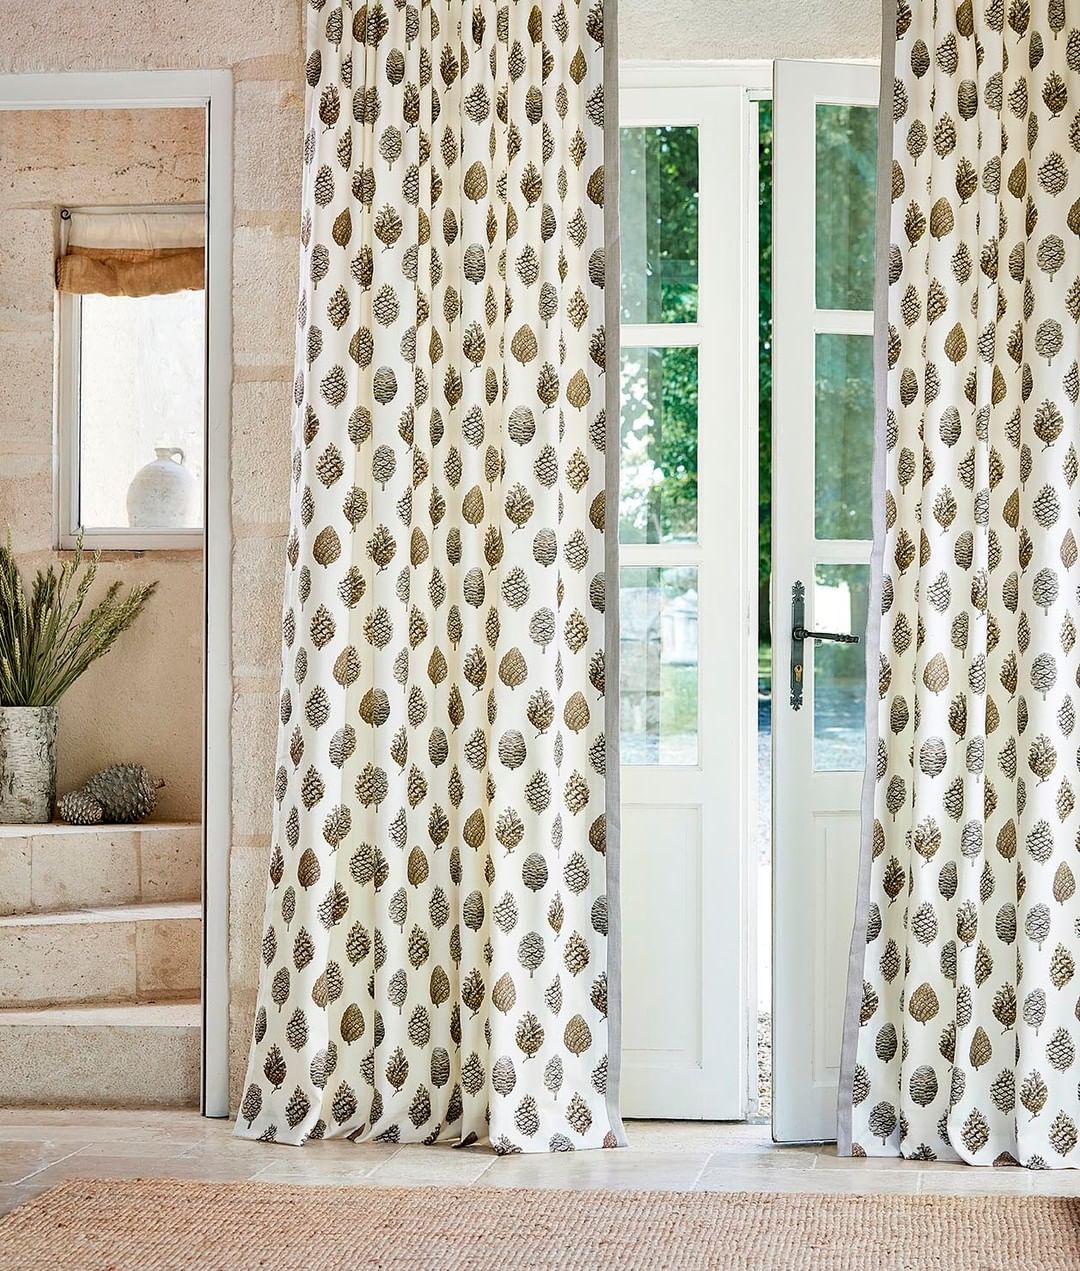 7 No-Sew Curtains That You Can Make for Your Home ...